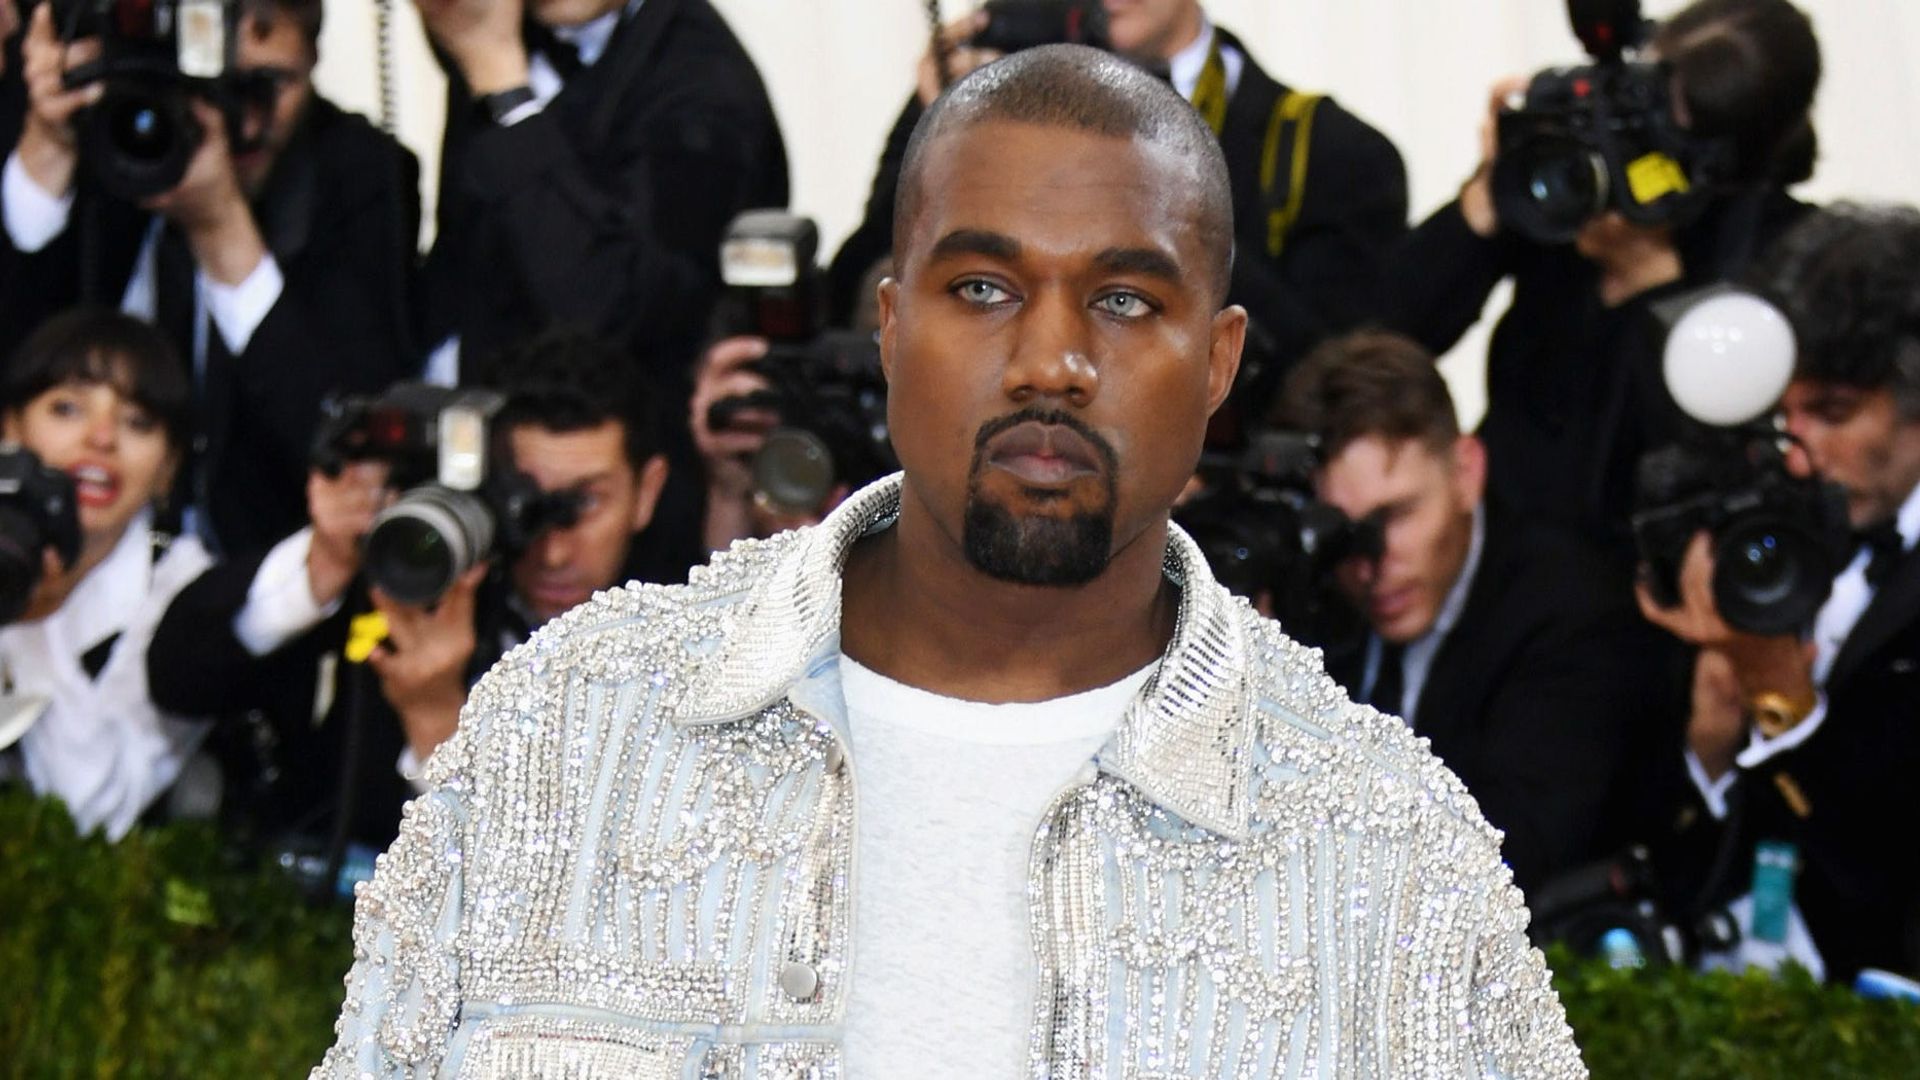 Kanye West nearly died in a car accident in 2002